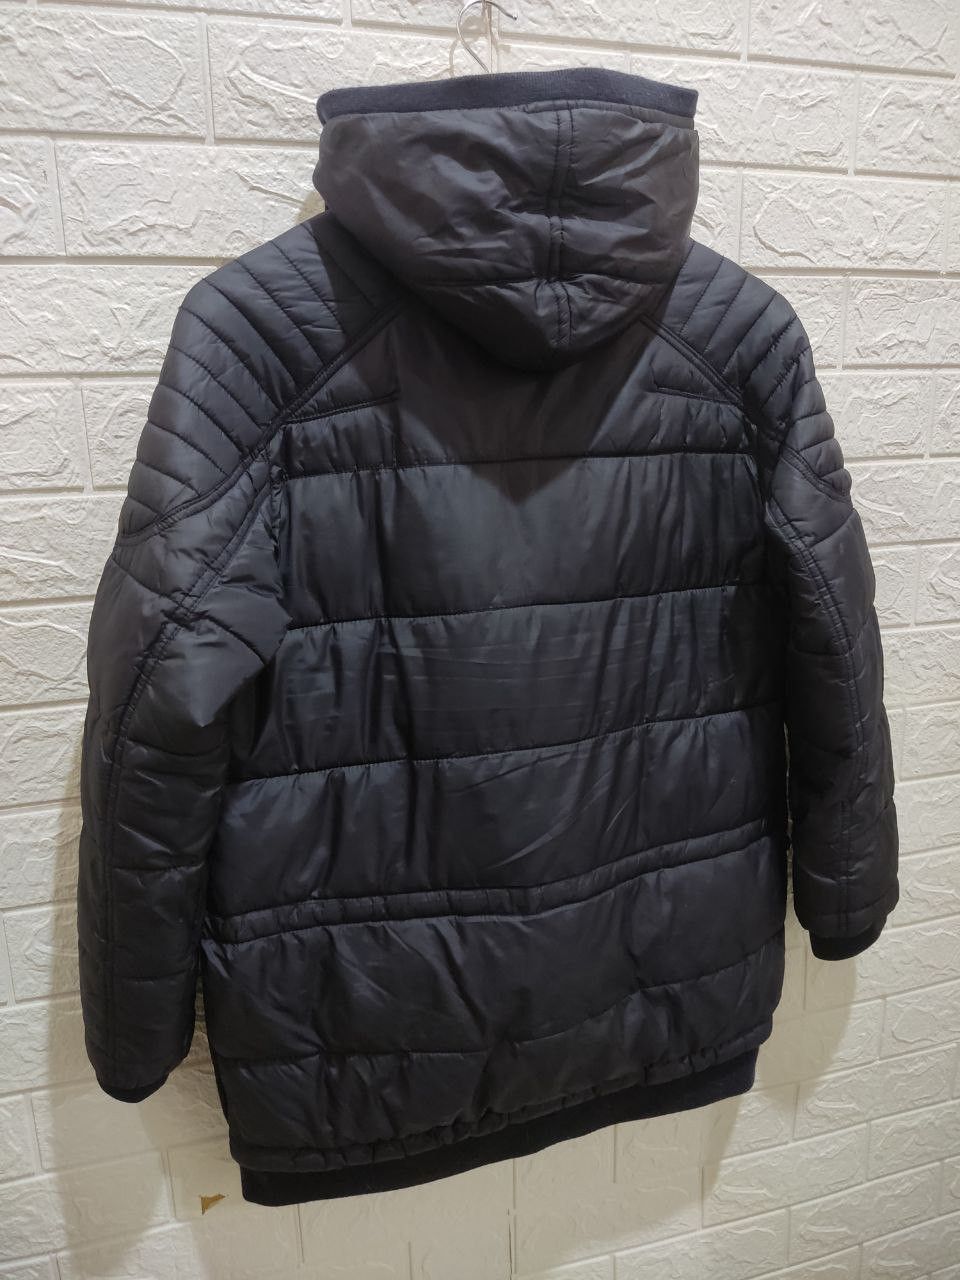 Archival Clothing - Codes Combine Hooded Puffer Down Jacket - 5